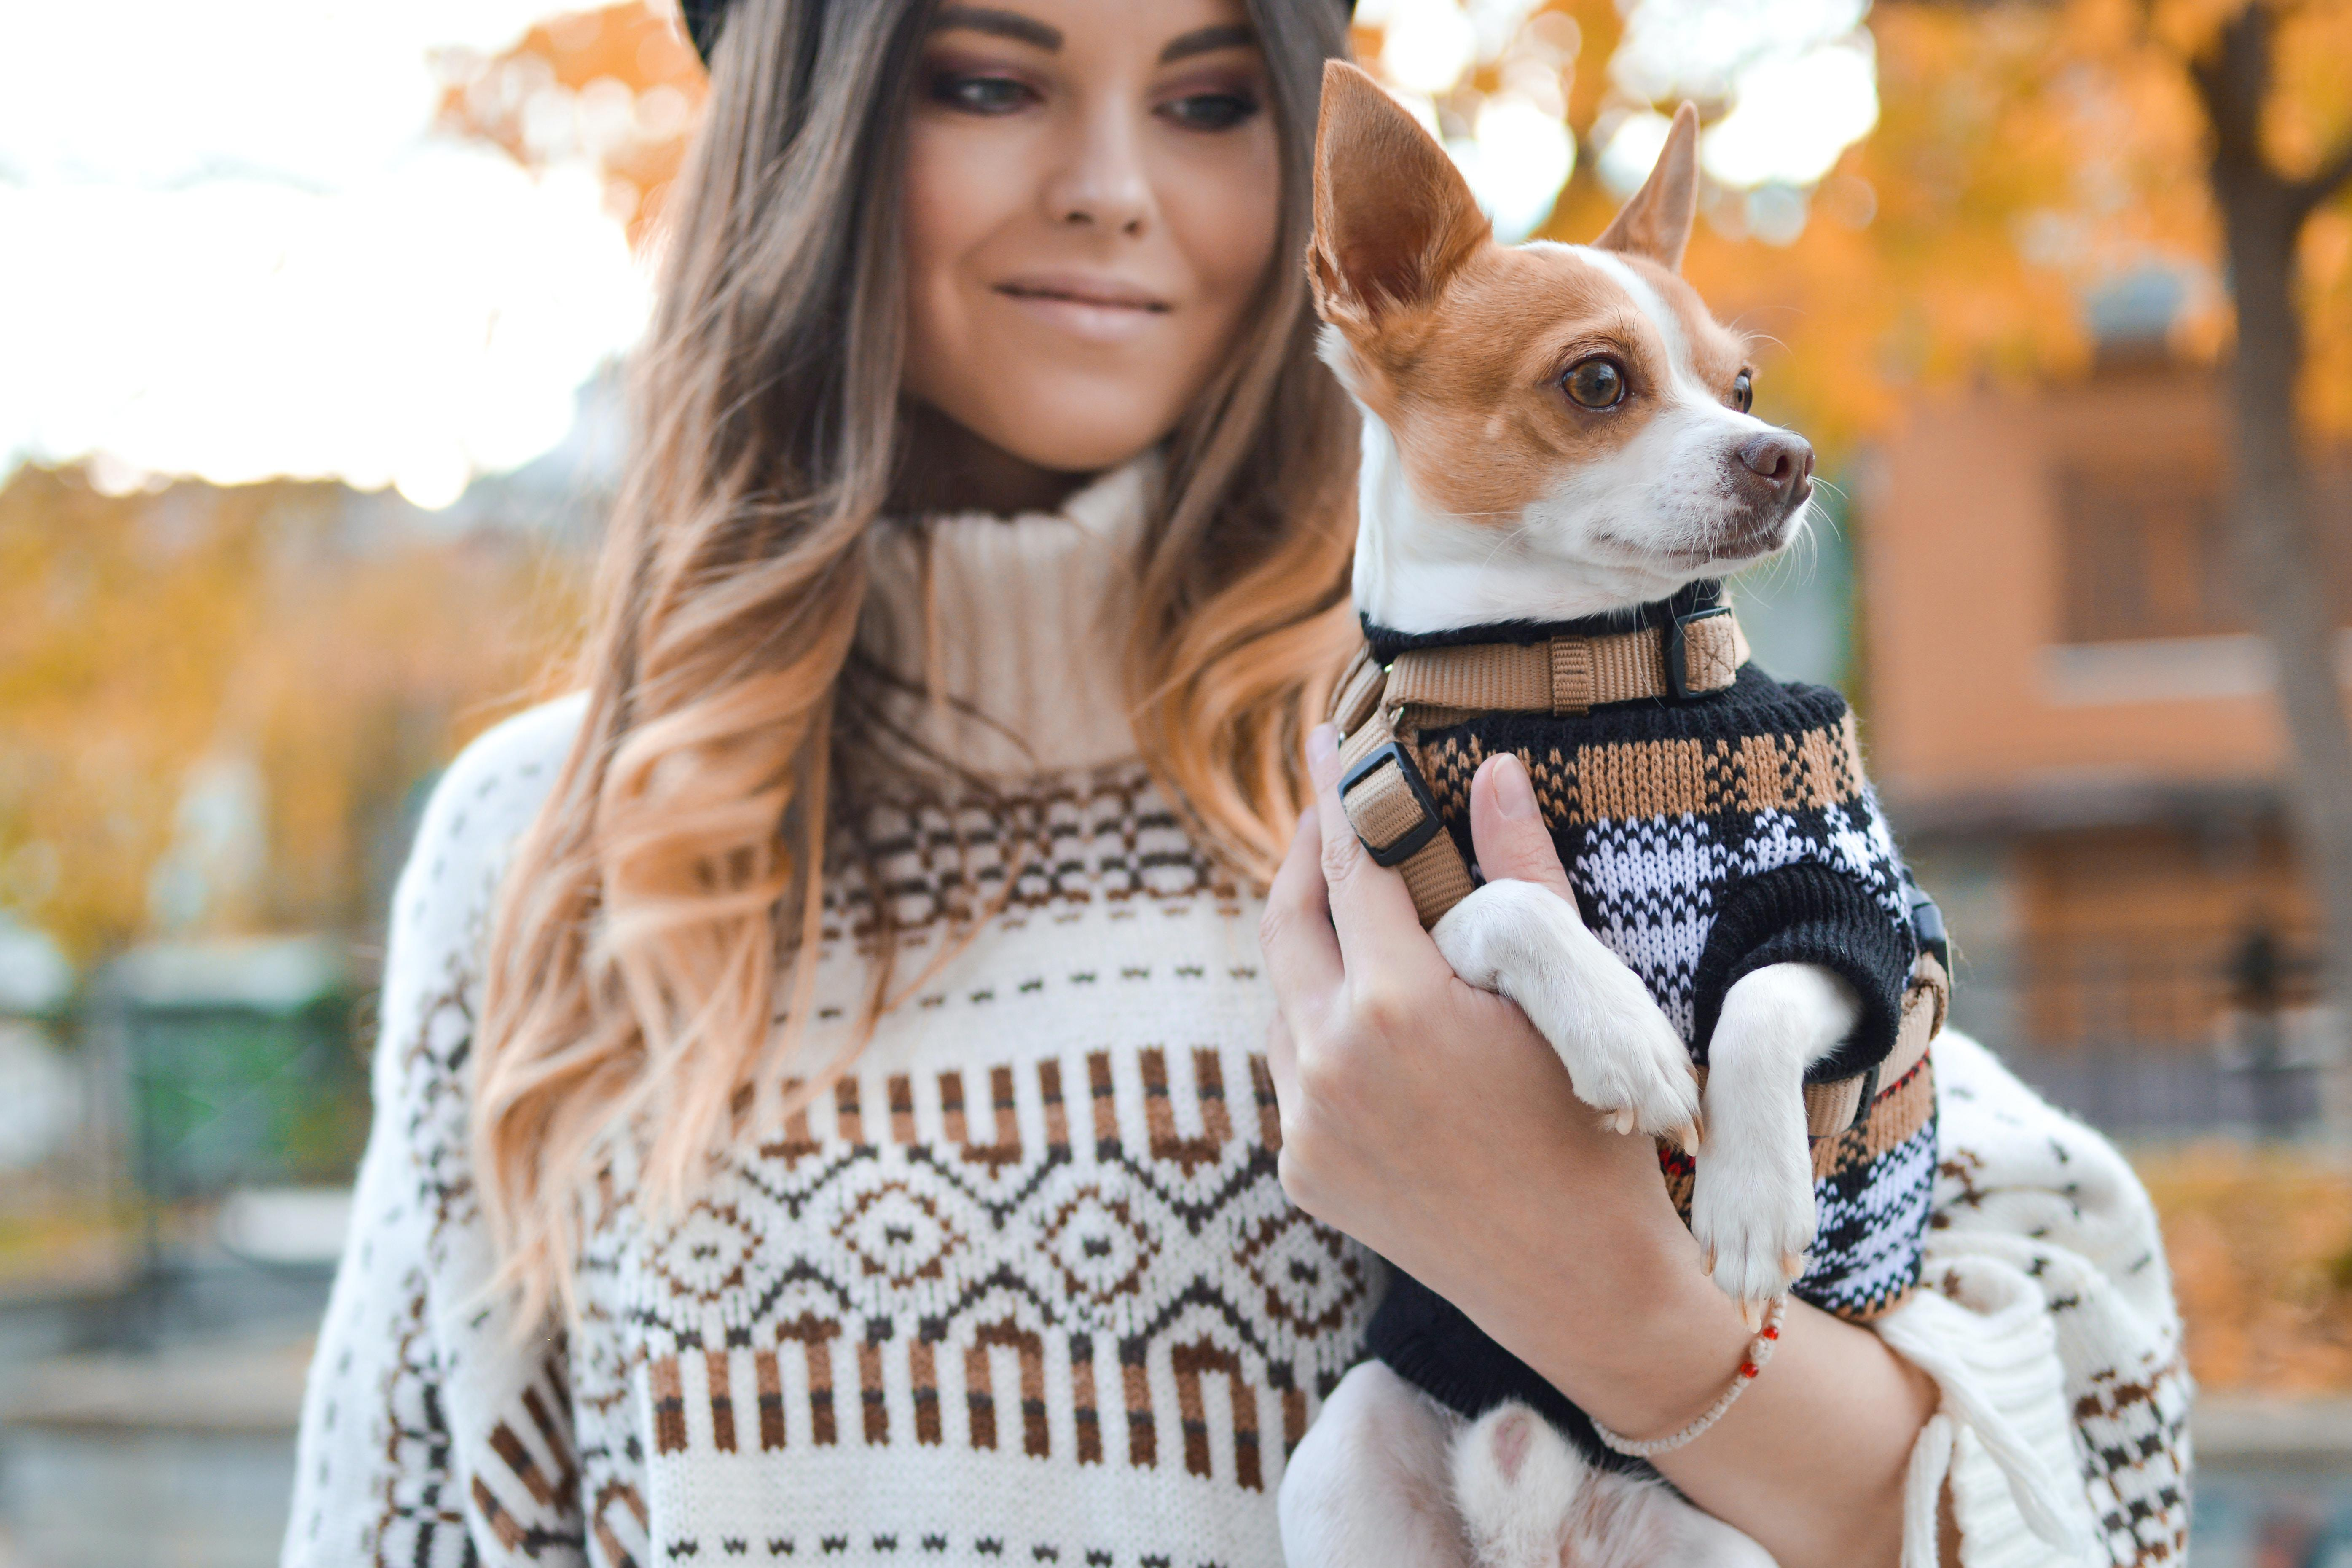 Training Chihuahuas to Become Service Dogs: How to Teach Your Small Dog Big Responsibilities